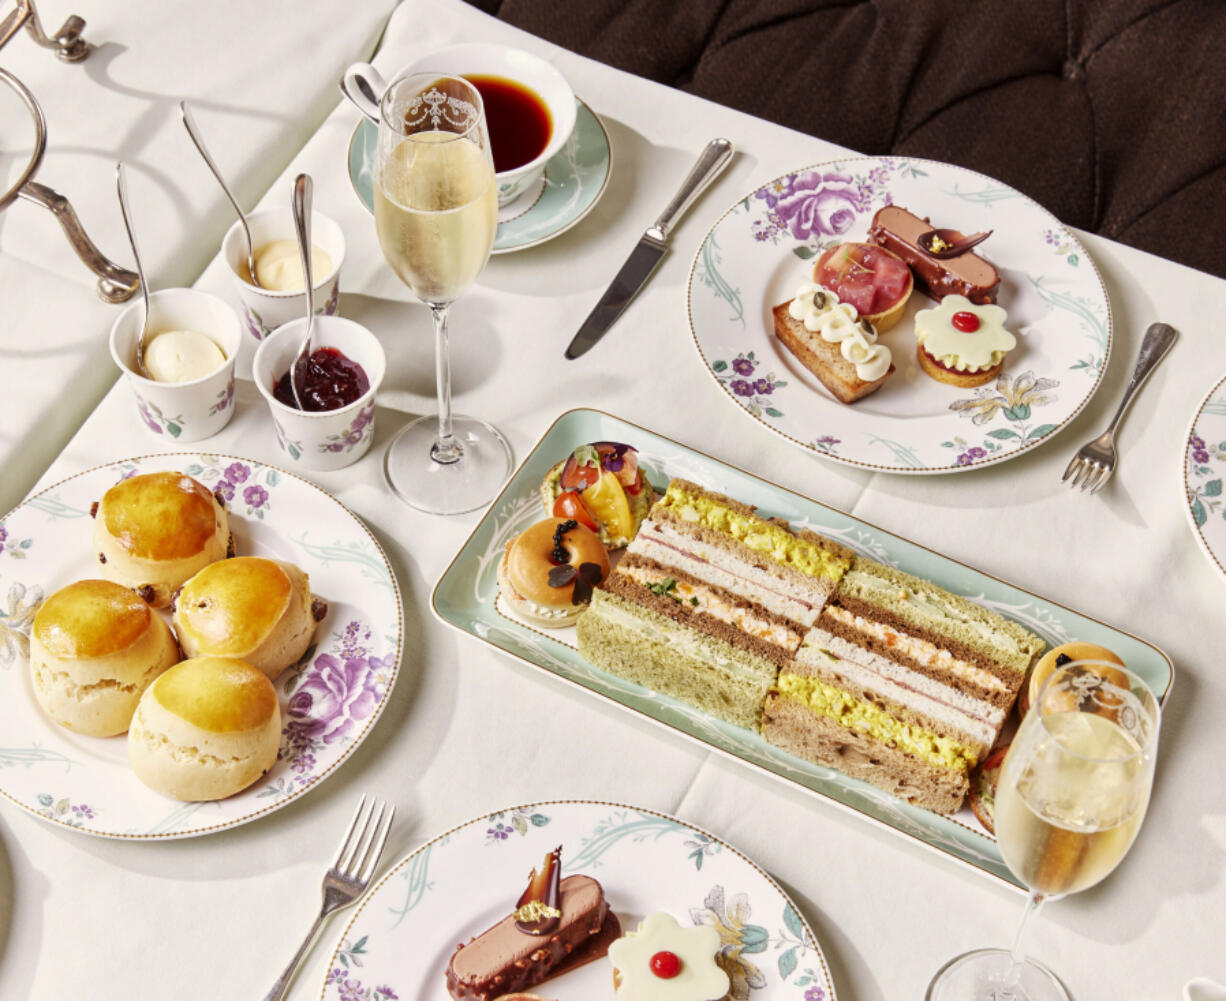 Afternoon tea at London;s Savoy Hotel begins at &uml;&pound;80 ($100) per person. The tea is as good as the scones and crustless sandwiches.